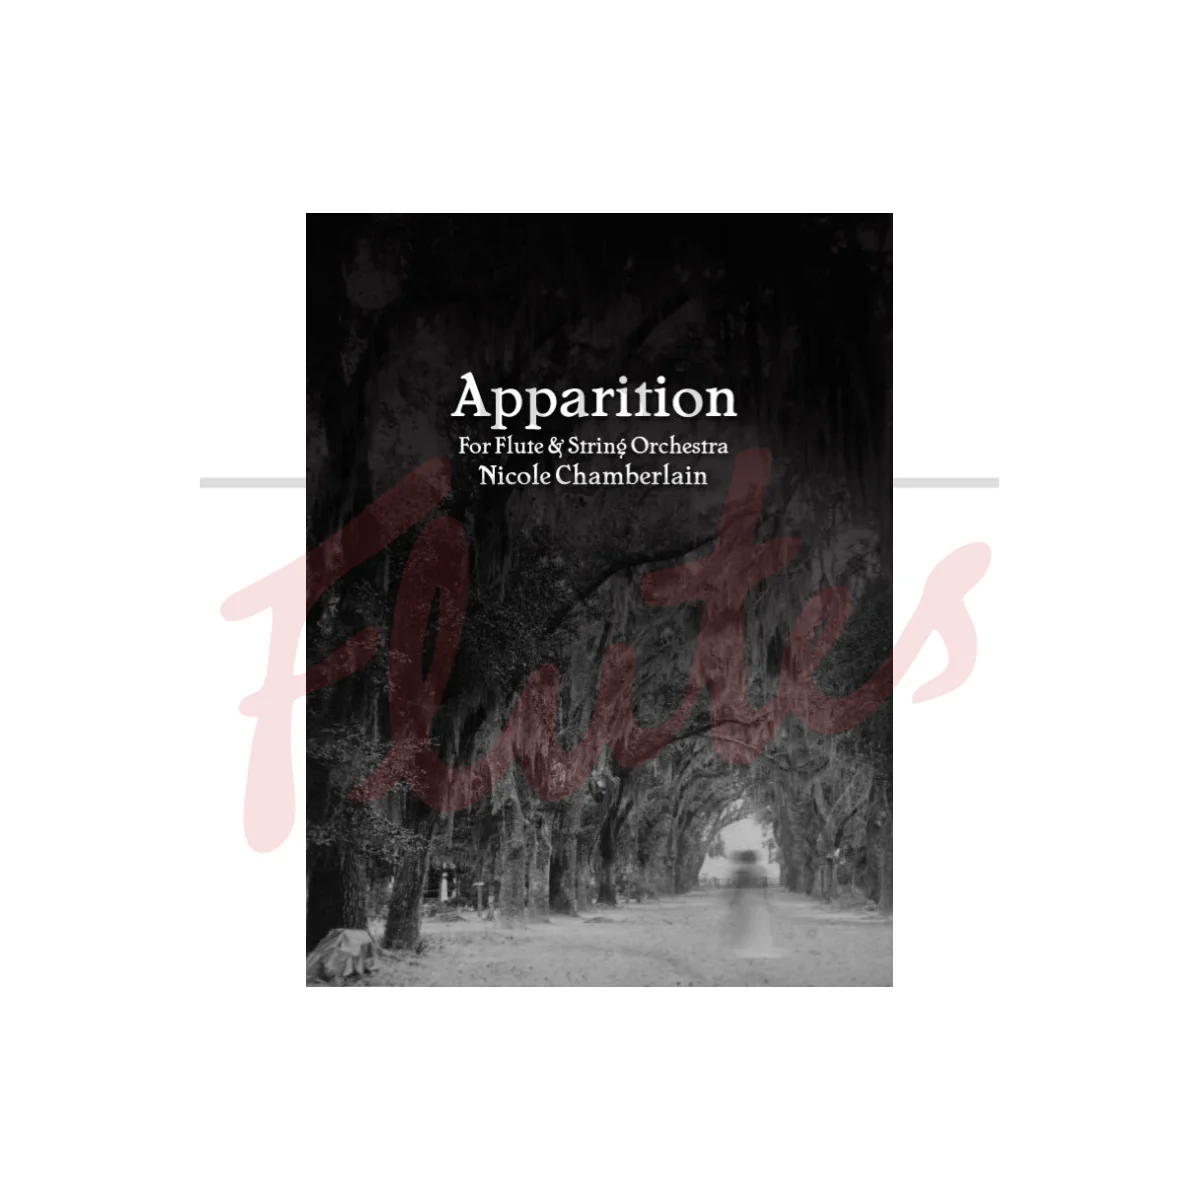 Apparition for Flute and String Orchestra